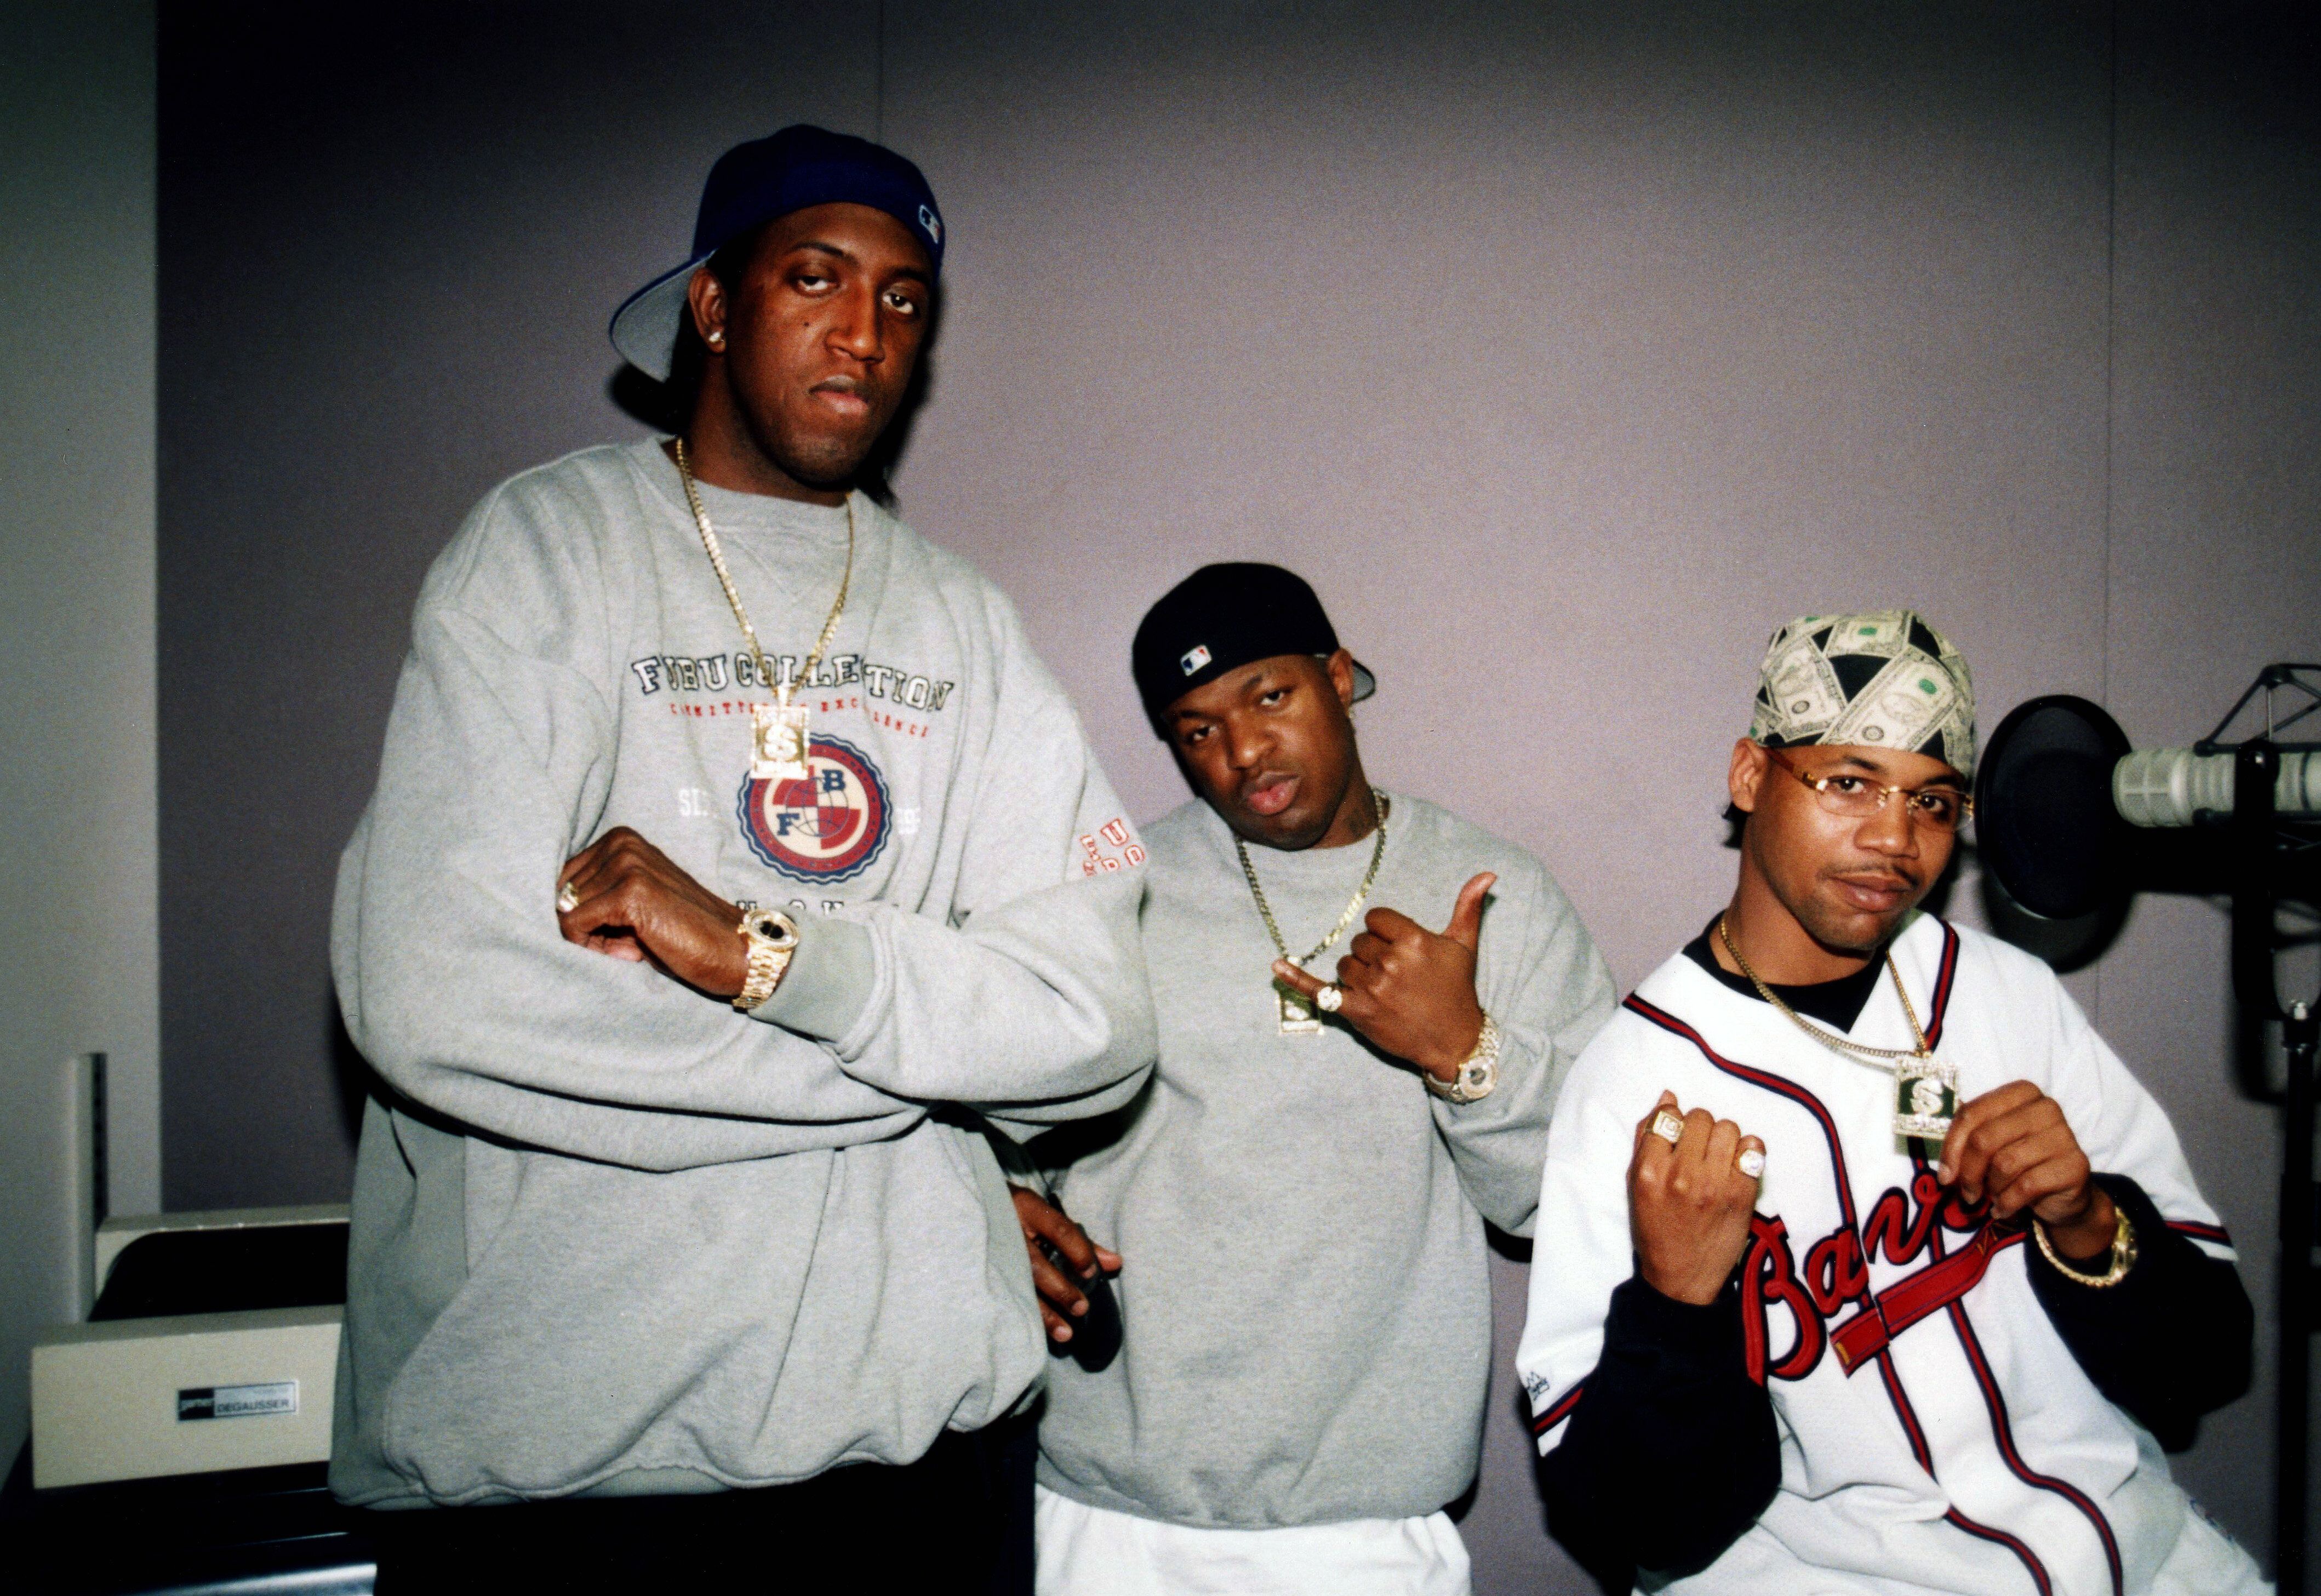 Cash Money Millionaires CEOs Slim (Ronald Jay Williams) and Baby (Bryan Christopher Williams) pose for photos with rapper Juvenile at WGCI-FM radio in Chicago in March 1999. (Photo By Raymond Boyd/Getty Images)